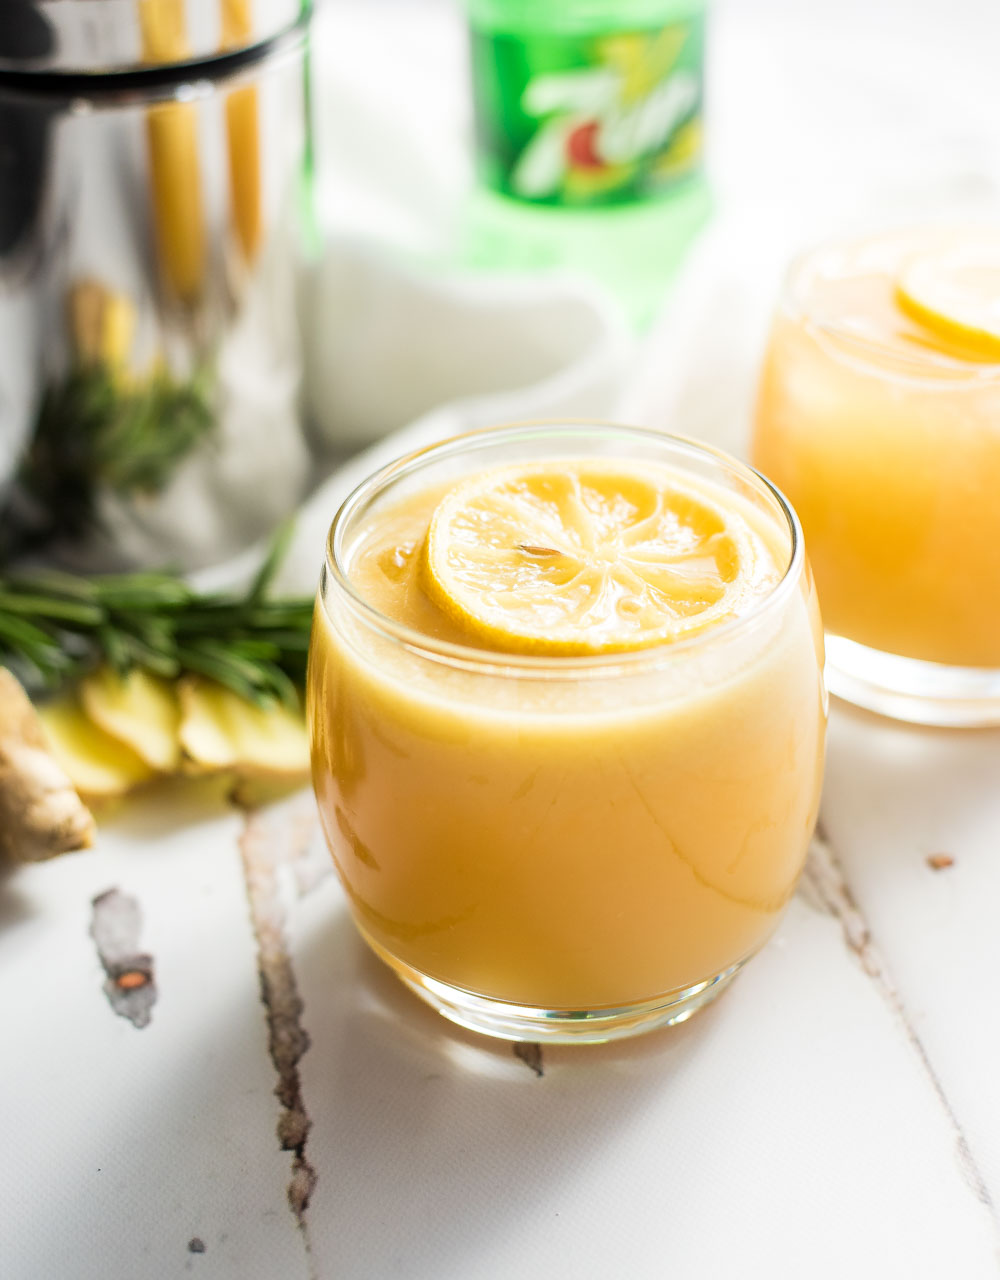 Citrus ginger beer cocktail with candied lemon slices is the perfect drink using 7UP®, fresh ginger, and freshly squeezed orange juice! It is kicked up a notch with both bourbon and pale ale beer creating a flavor explosion!